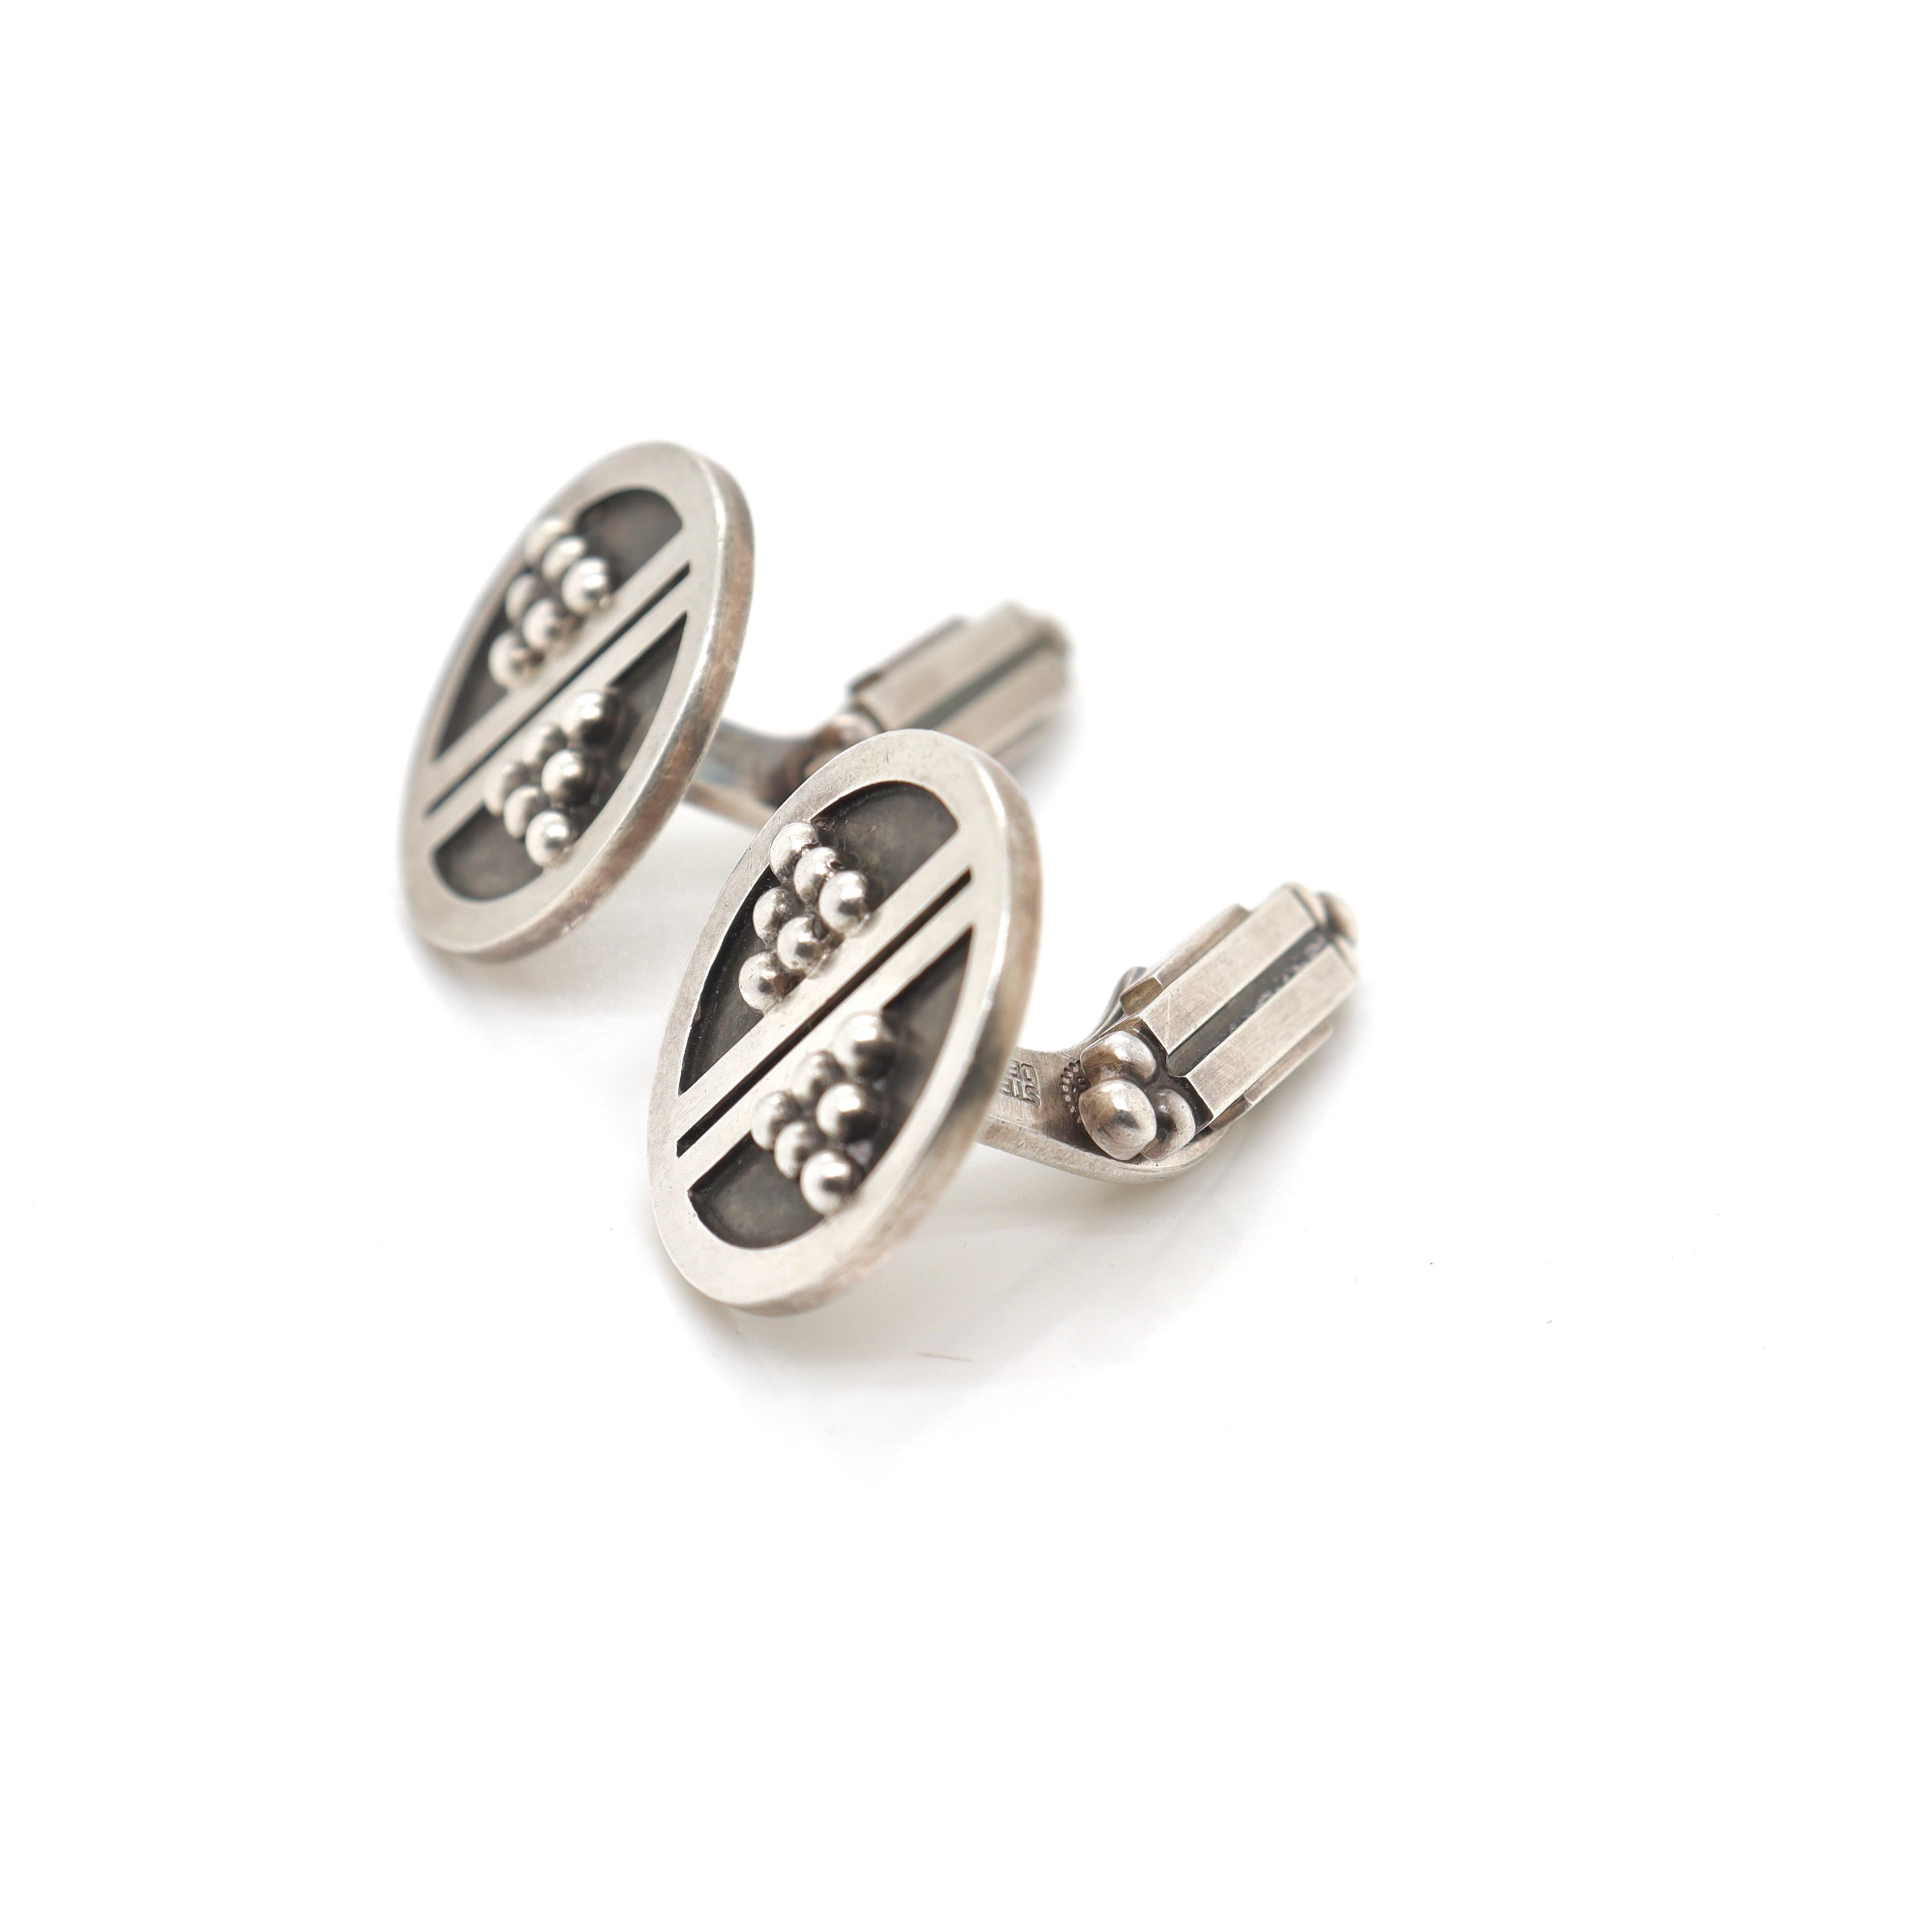 Pair of Georg Jensen Sterling Silver Cufflinks No. 57 In Good Condition For Sale In Philadelphia, PA